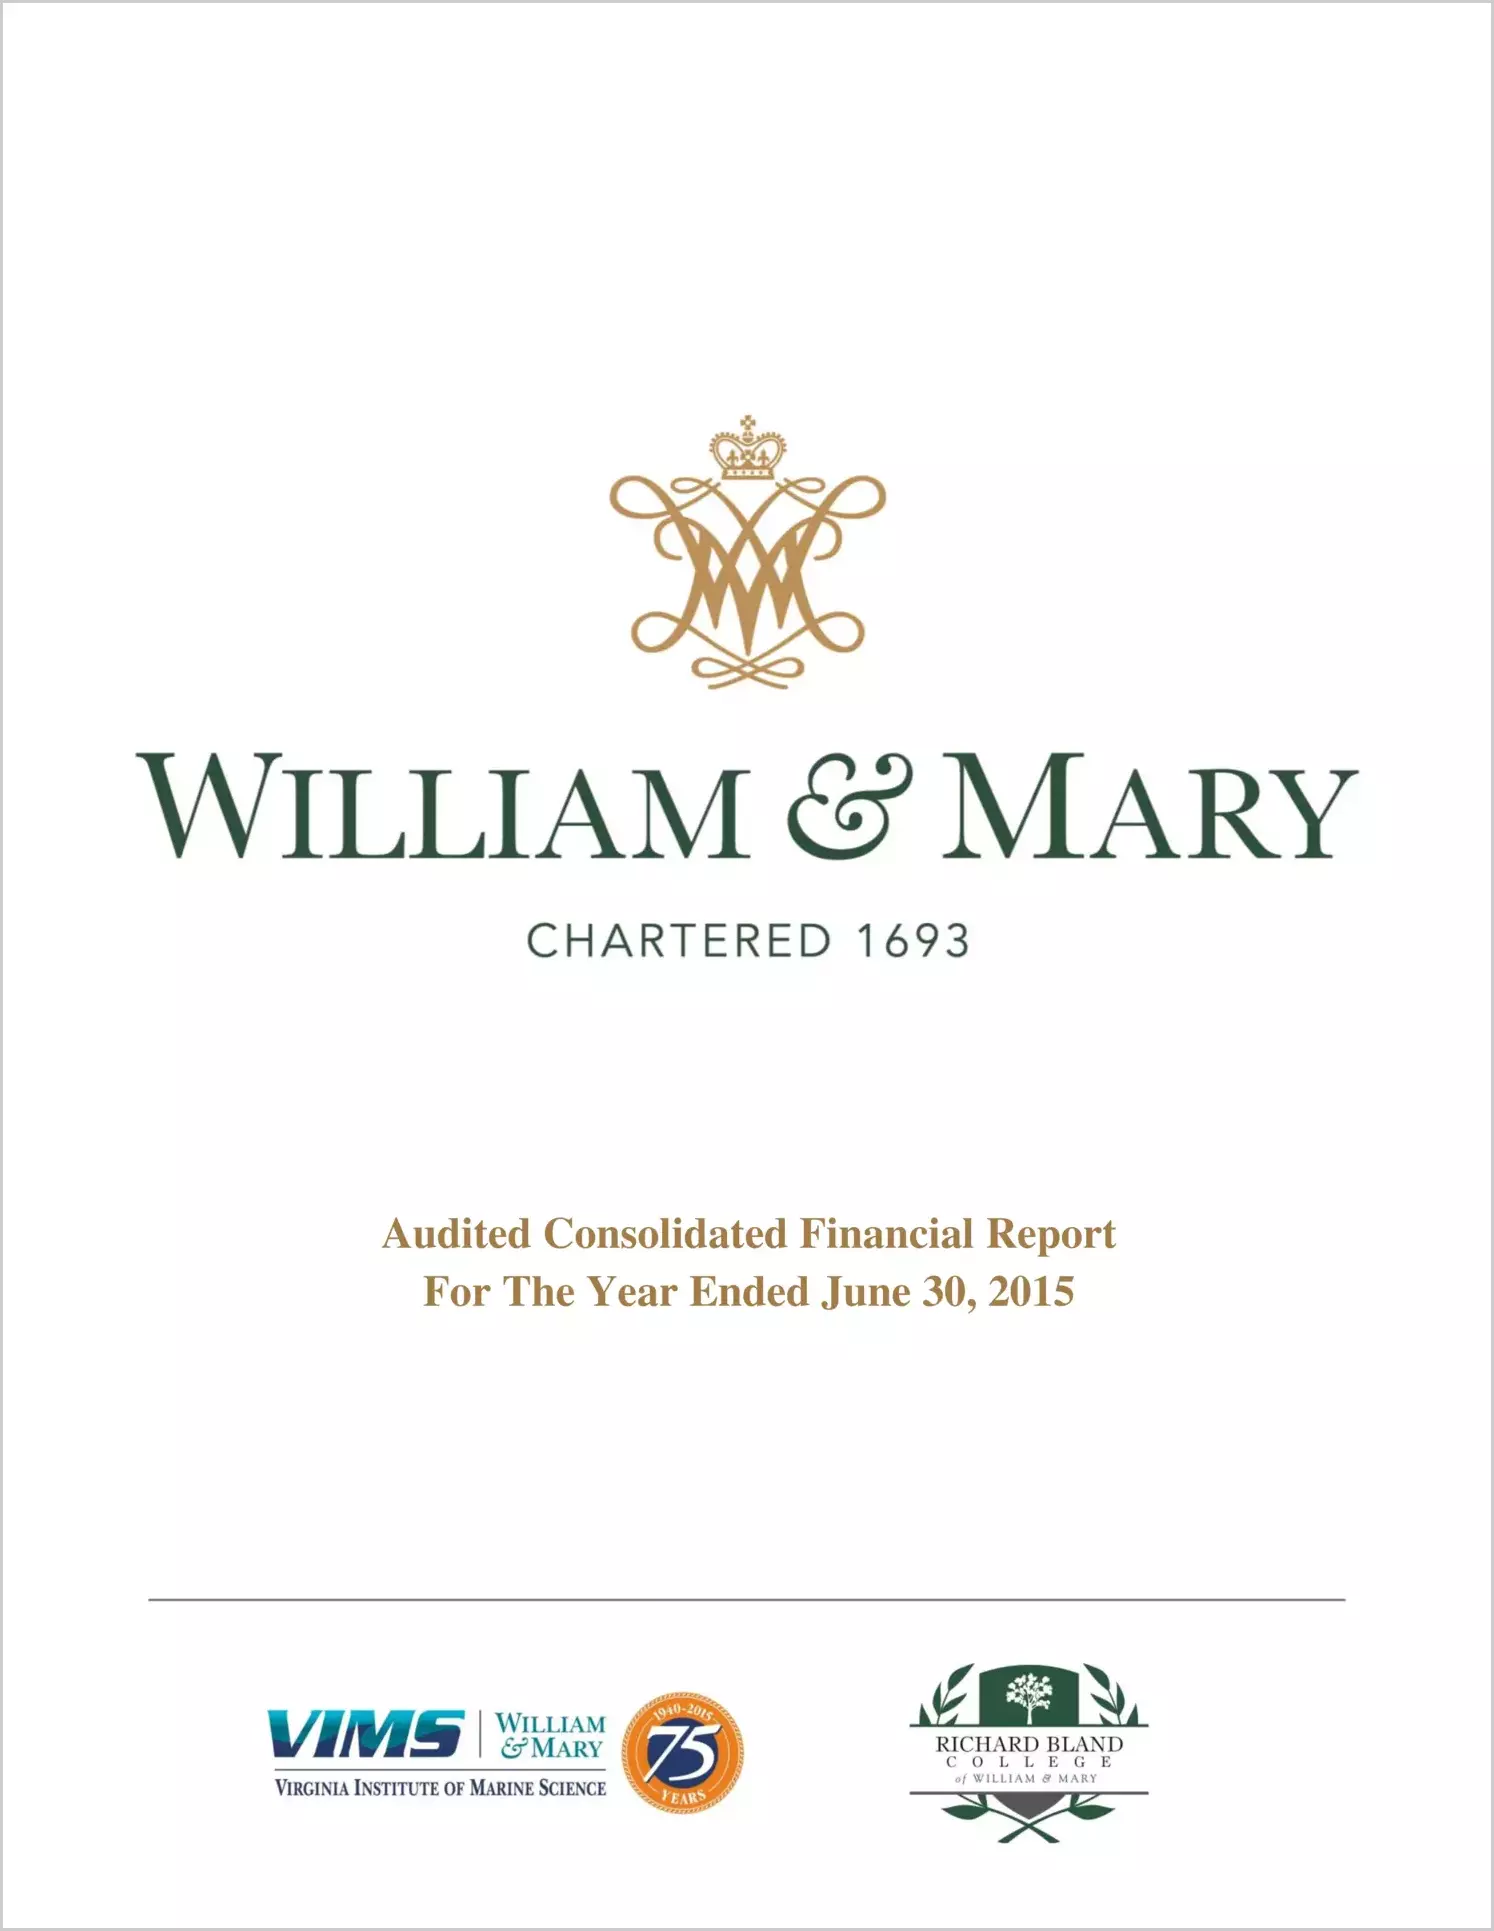 William & Mary, Virginia Institute of Marine Science, and Richard Bland College Financial Statements for the year ended June 30, 2015